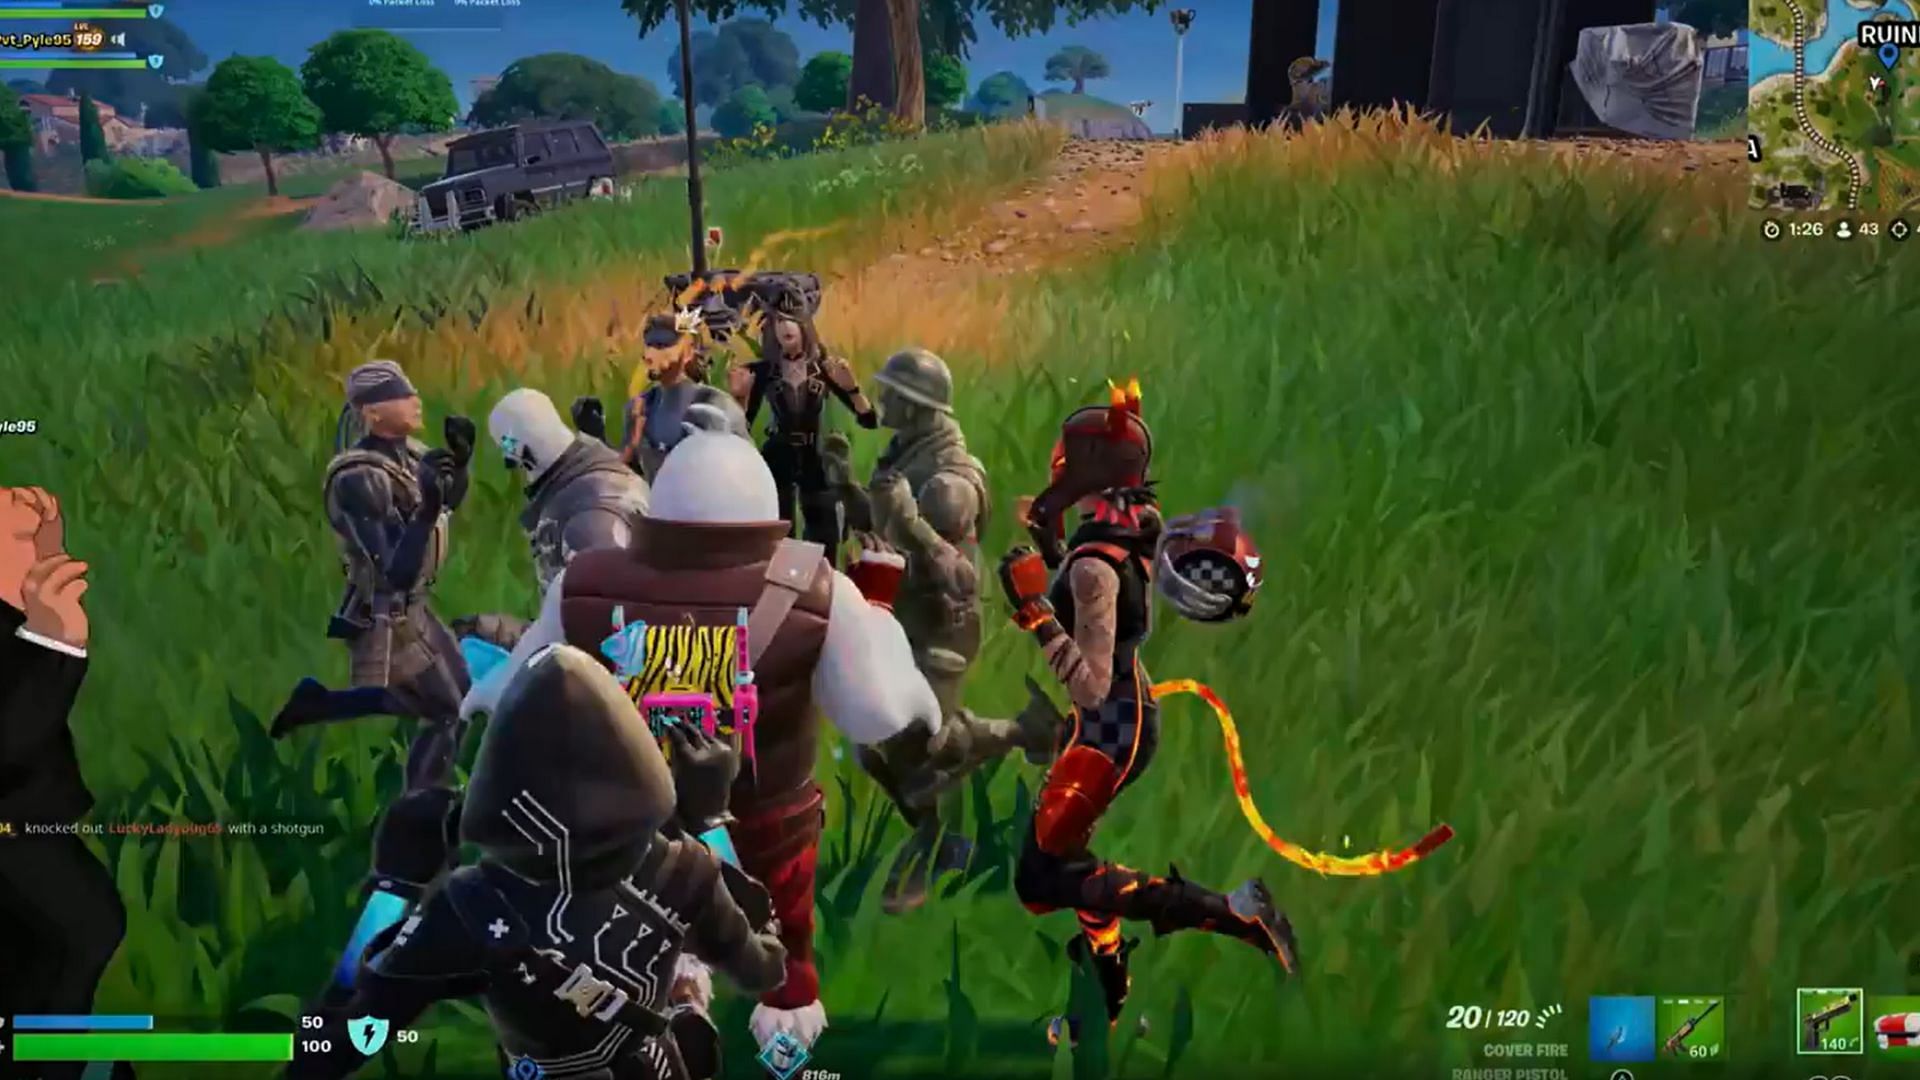 Fortnite players Emote together in a wholesome moment, proof that live events bring the community together